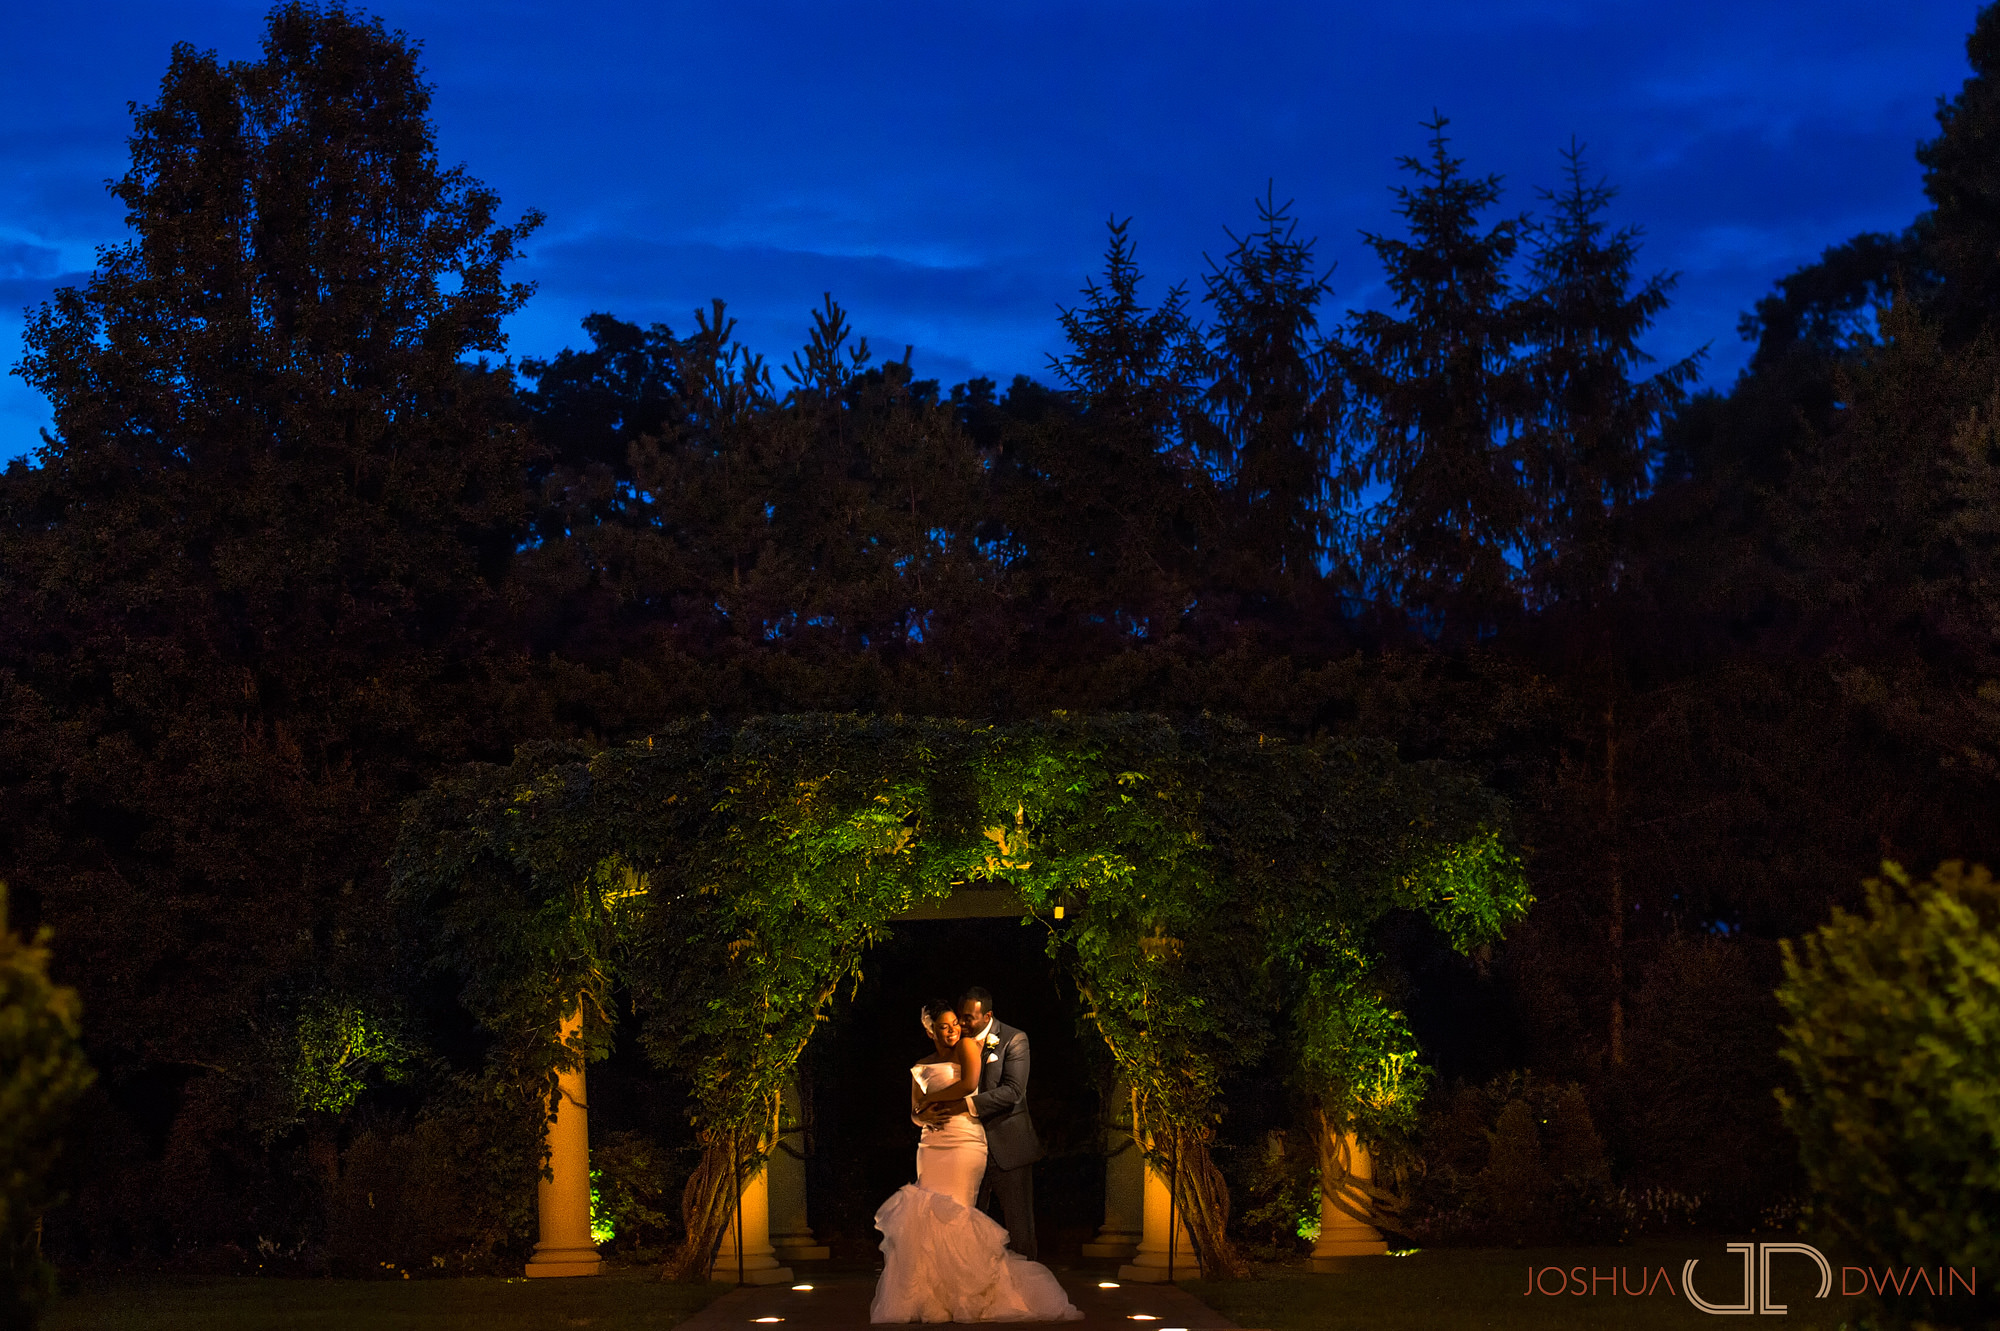 Adrienne & Chad's Wedding at Crest Hollow Country Club in Long Island, NY